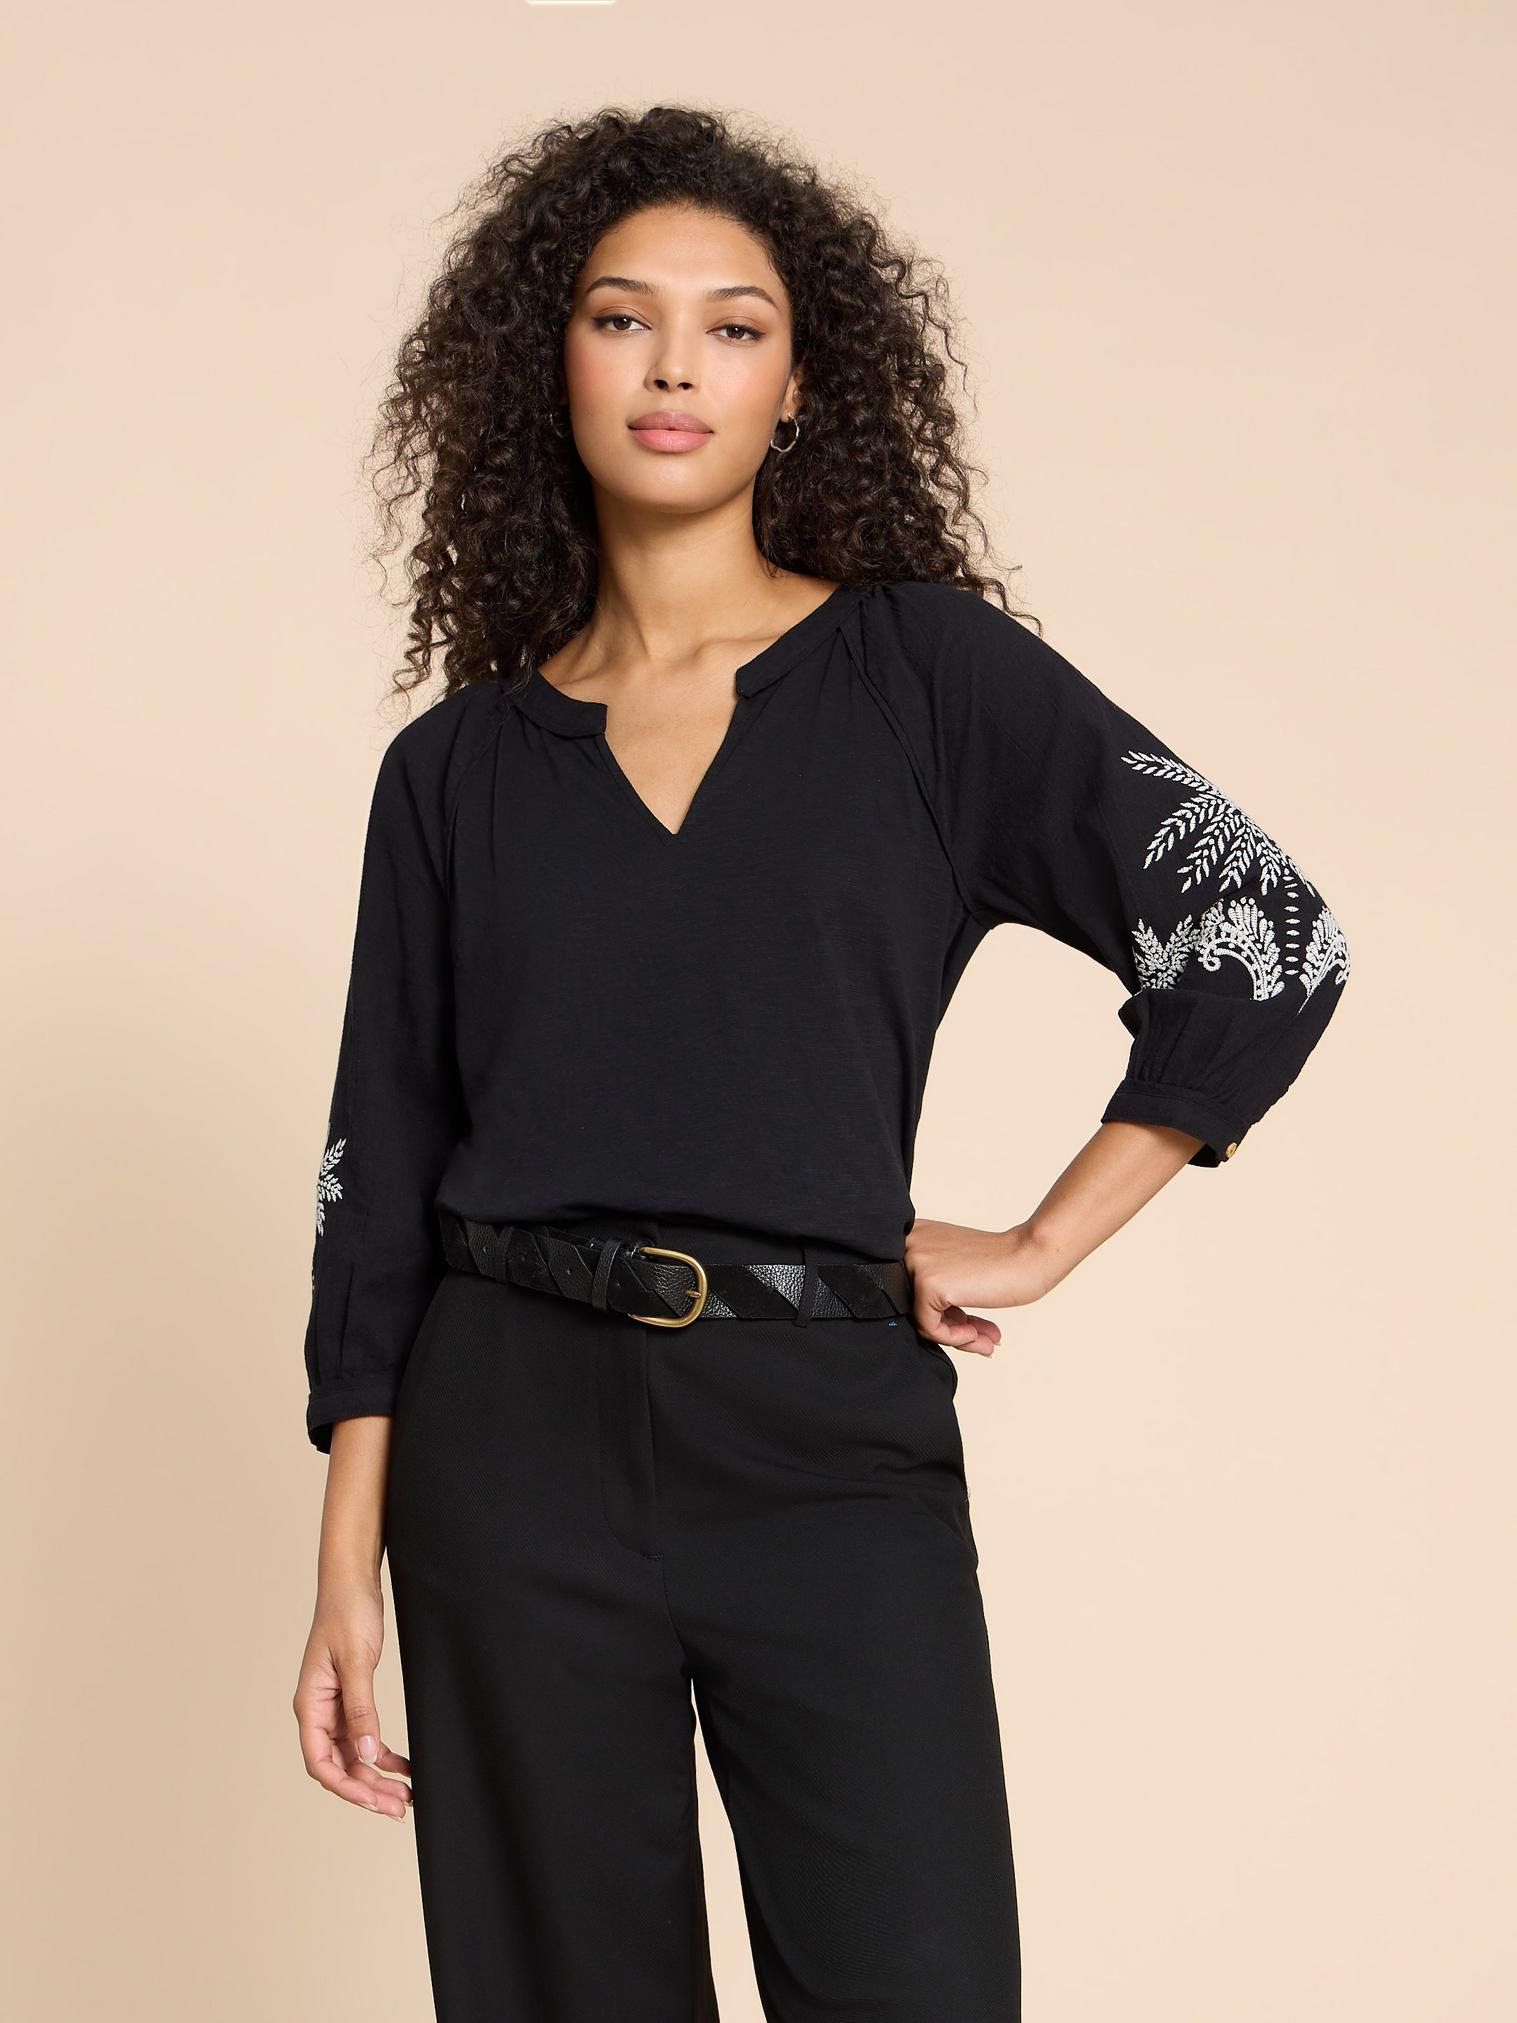 MILLIE MIX EMBROIDERED TOP in BLK MLT - LIFESTYLE